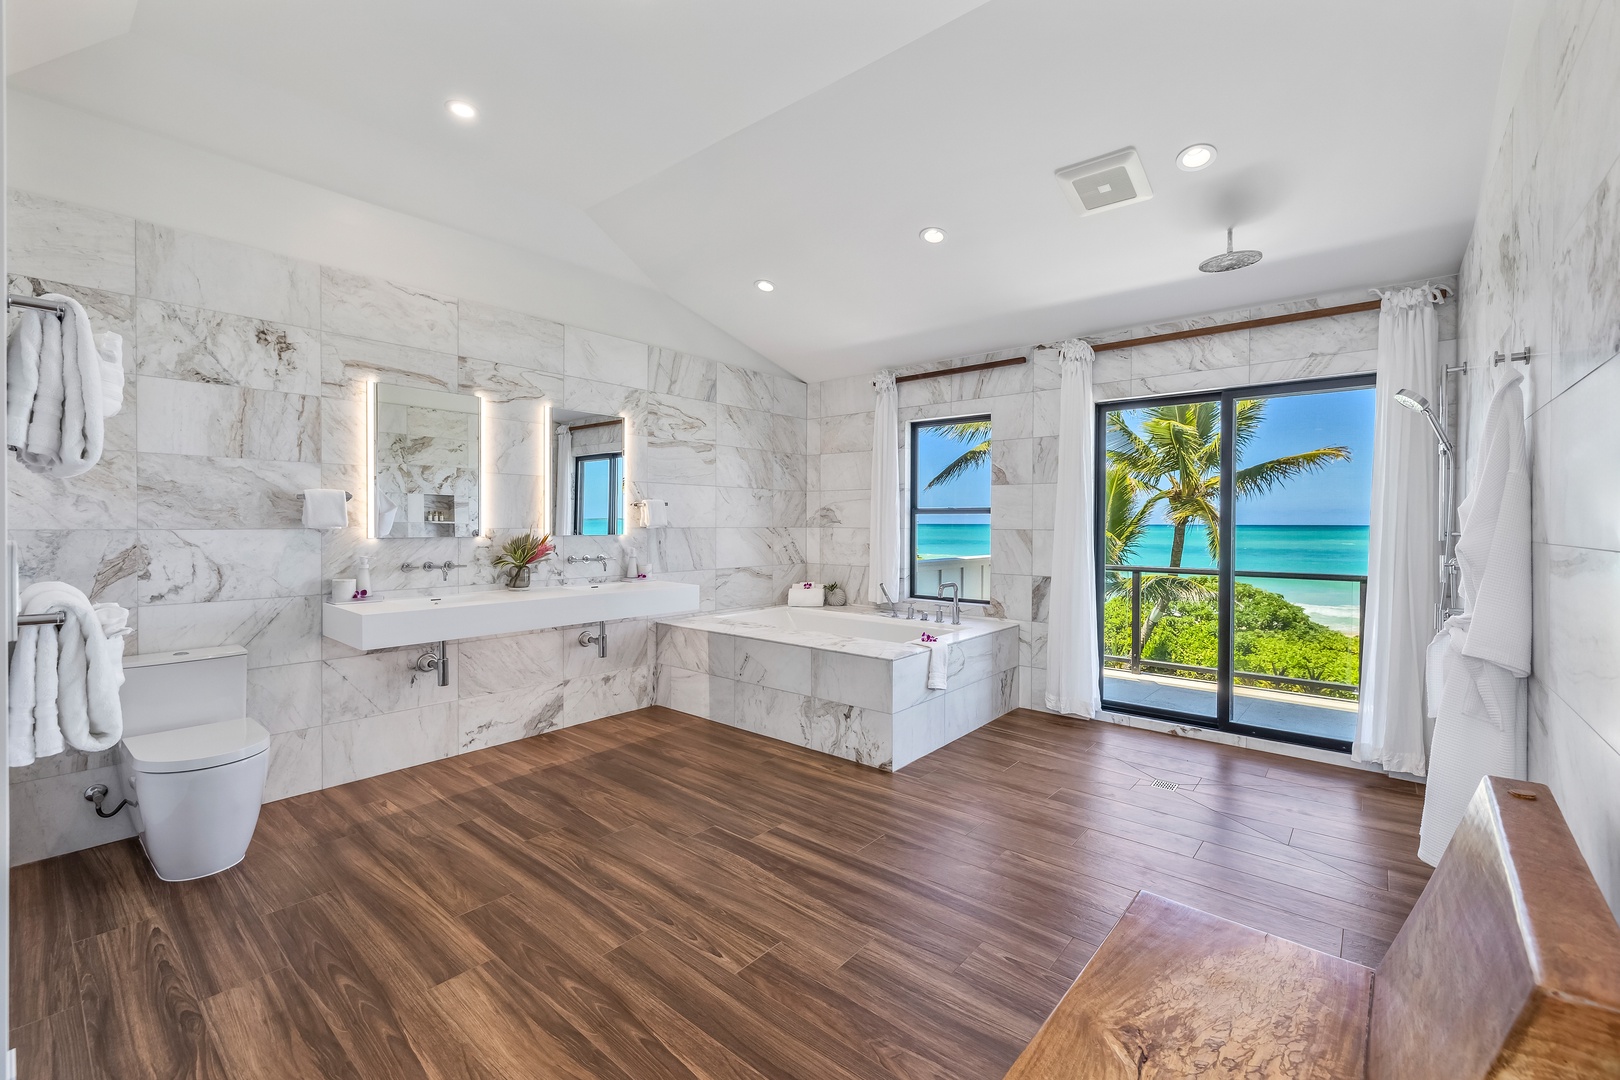 Kailua Vacation Rentals, Kailua Beach Villa - The Primary suite ensuite bathroom offers a luxurious, spa-like experience